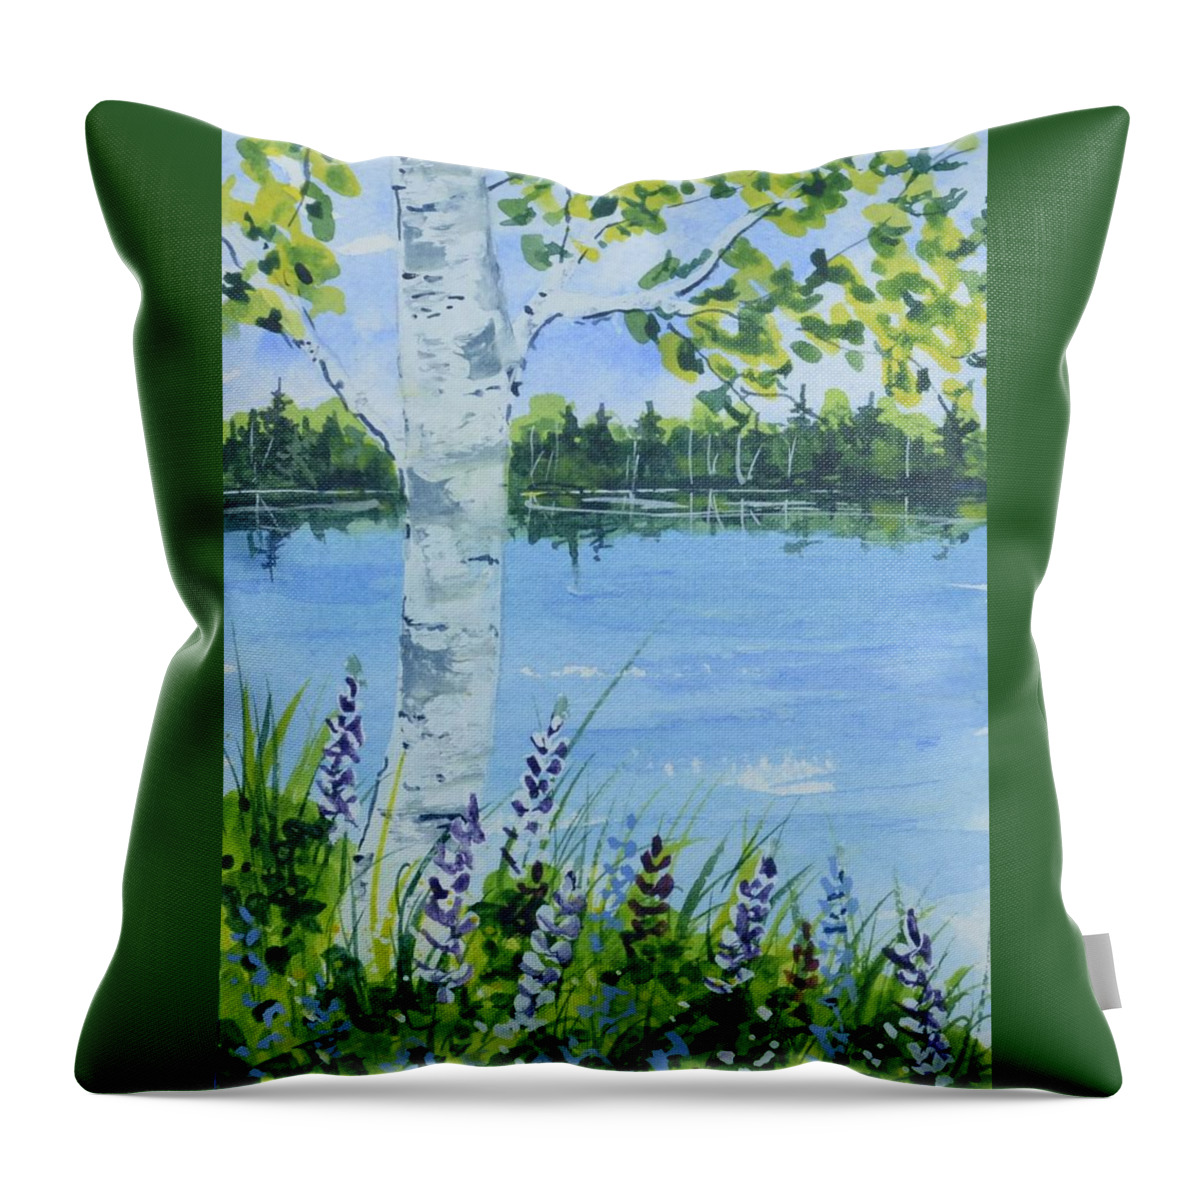 Birch Throw Pillow featuring the painting Summer Birch by Kellie Chasse